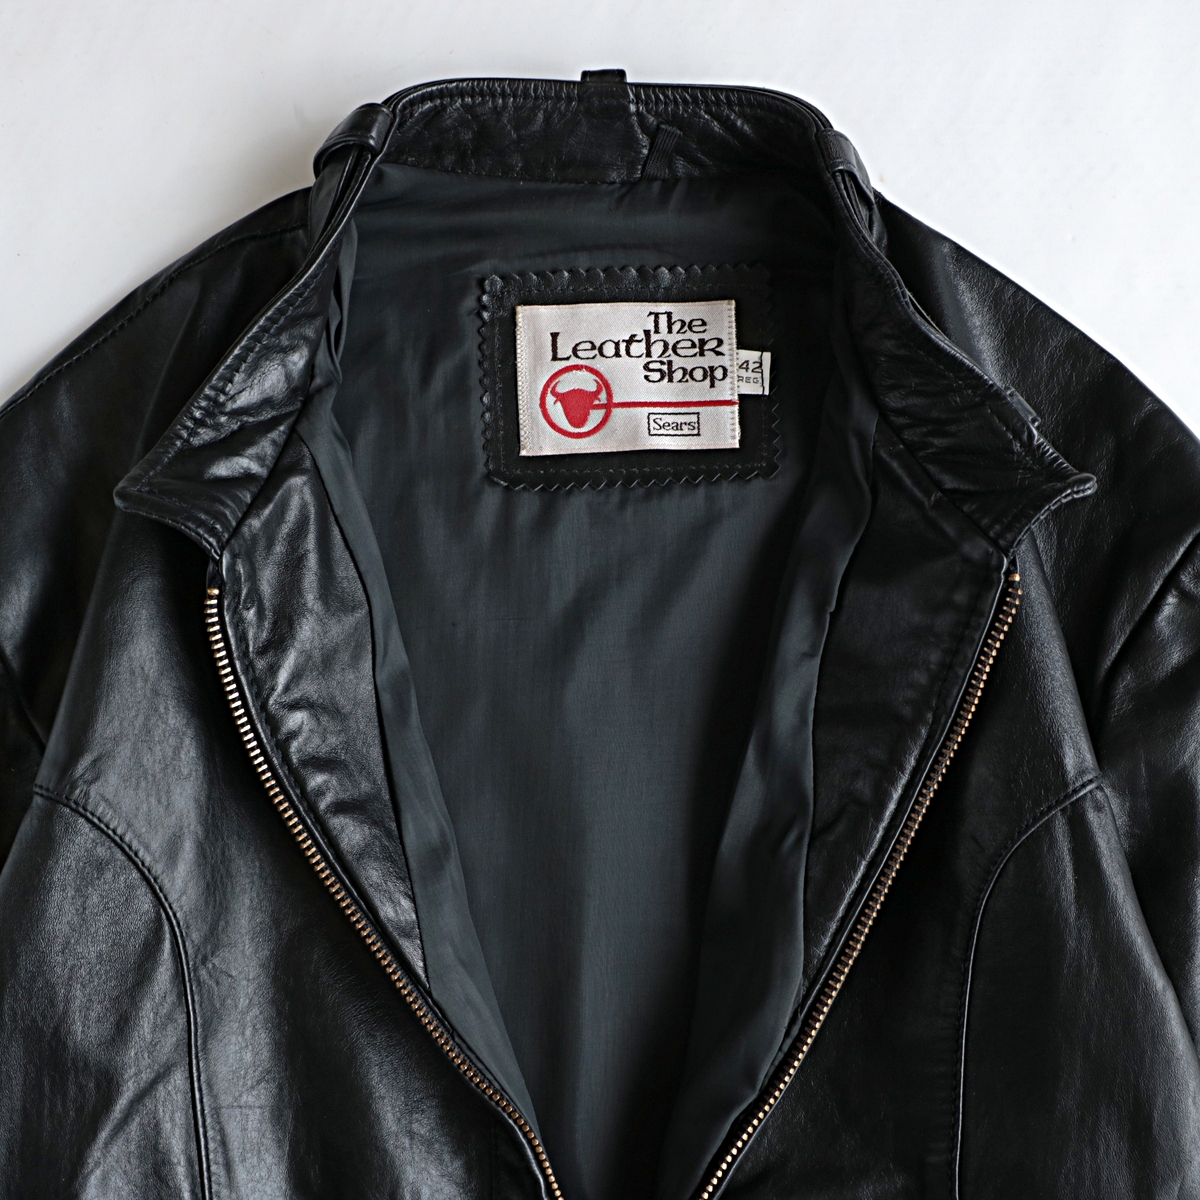 70s vintage sears ”the leather shop” シングル レザー ライダース 